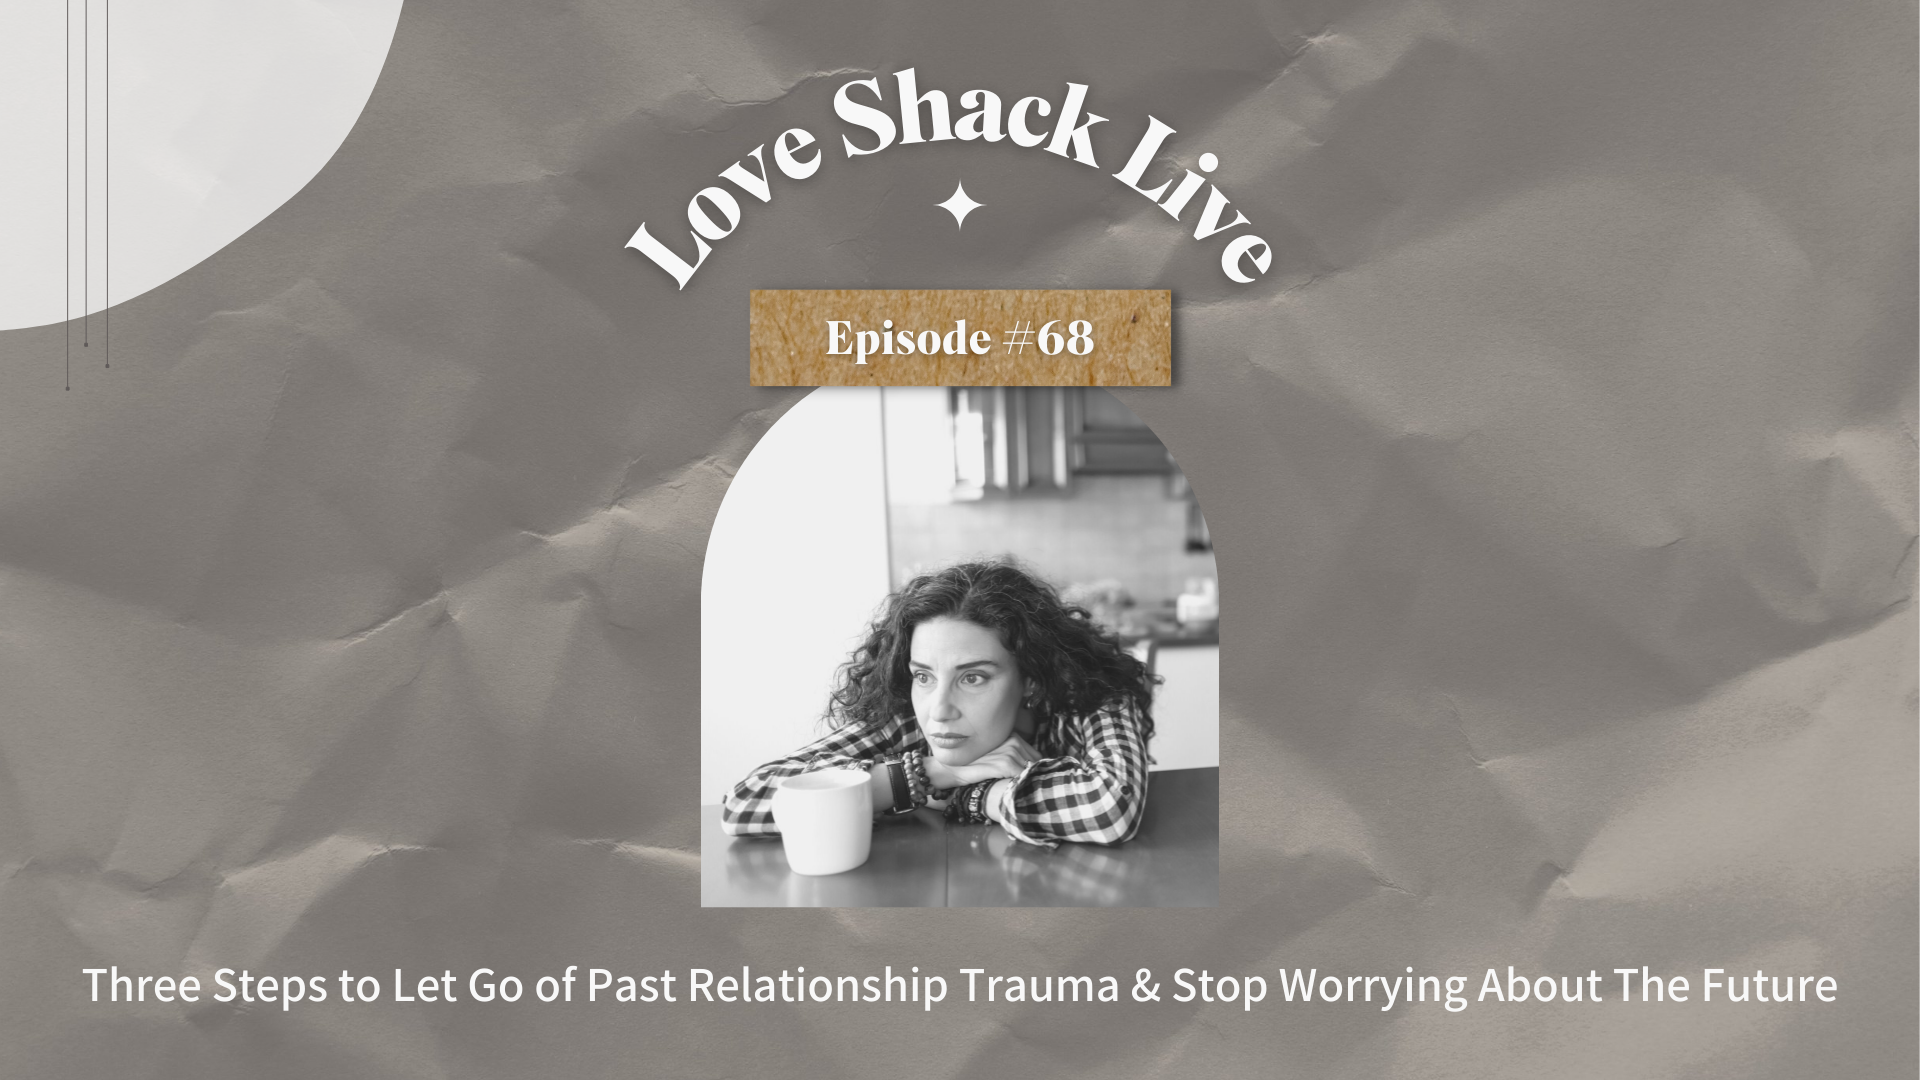 Three Steps to Let Go of Past Relationship Trauma & Stop Worrying About The Future